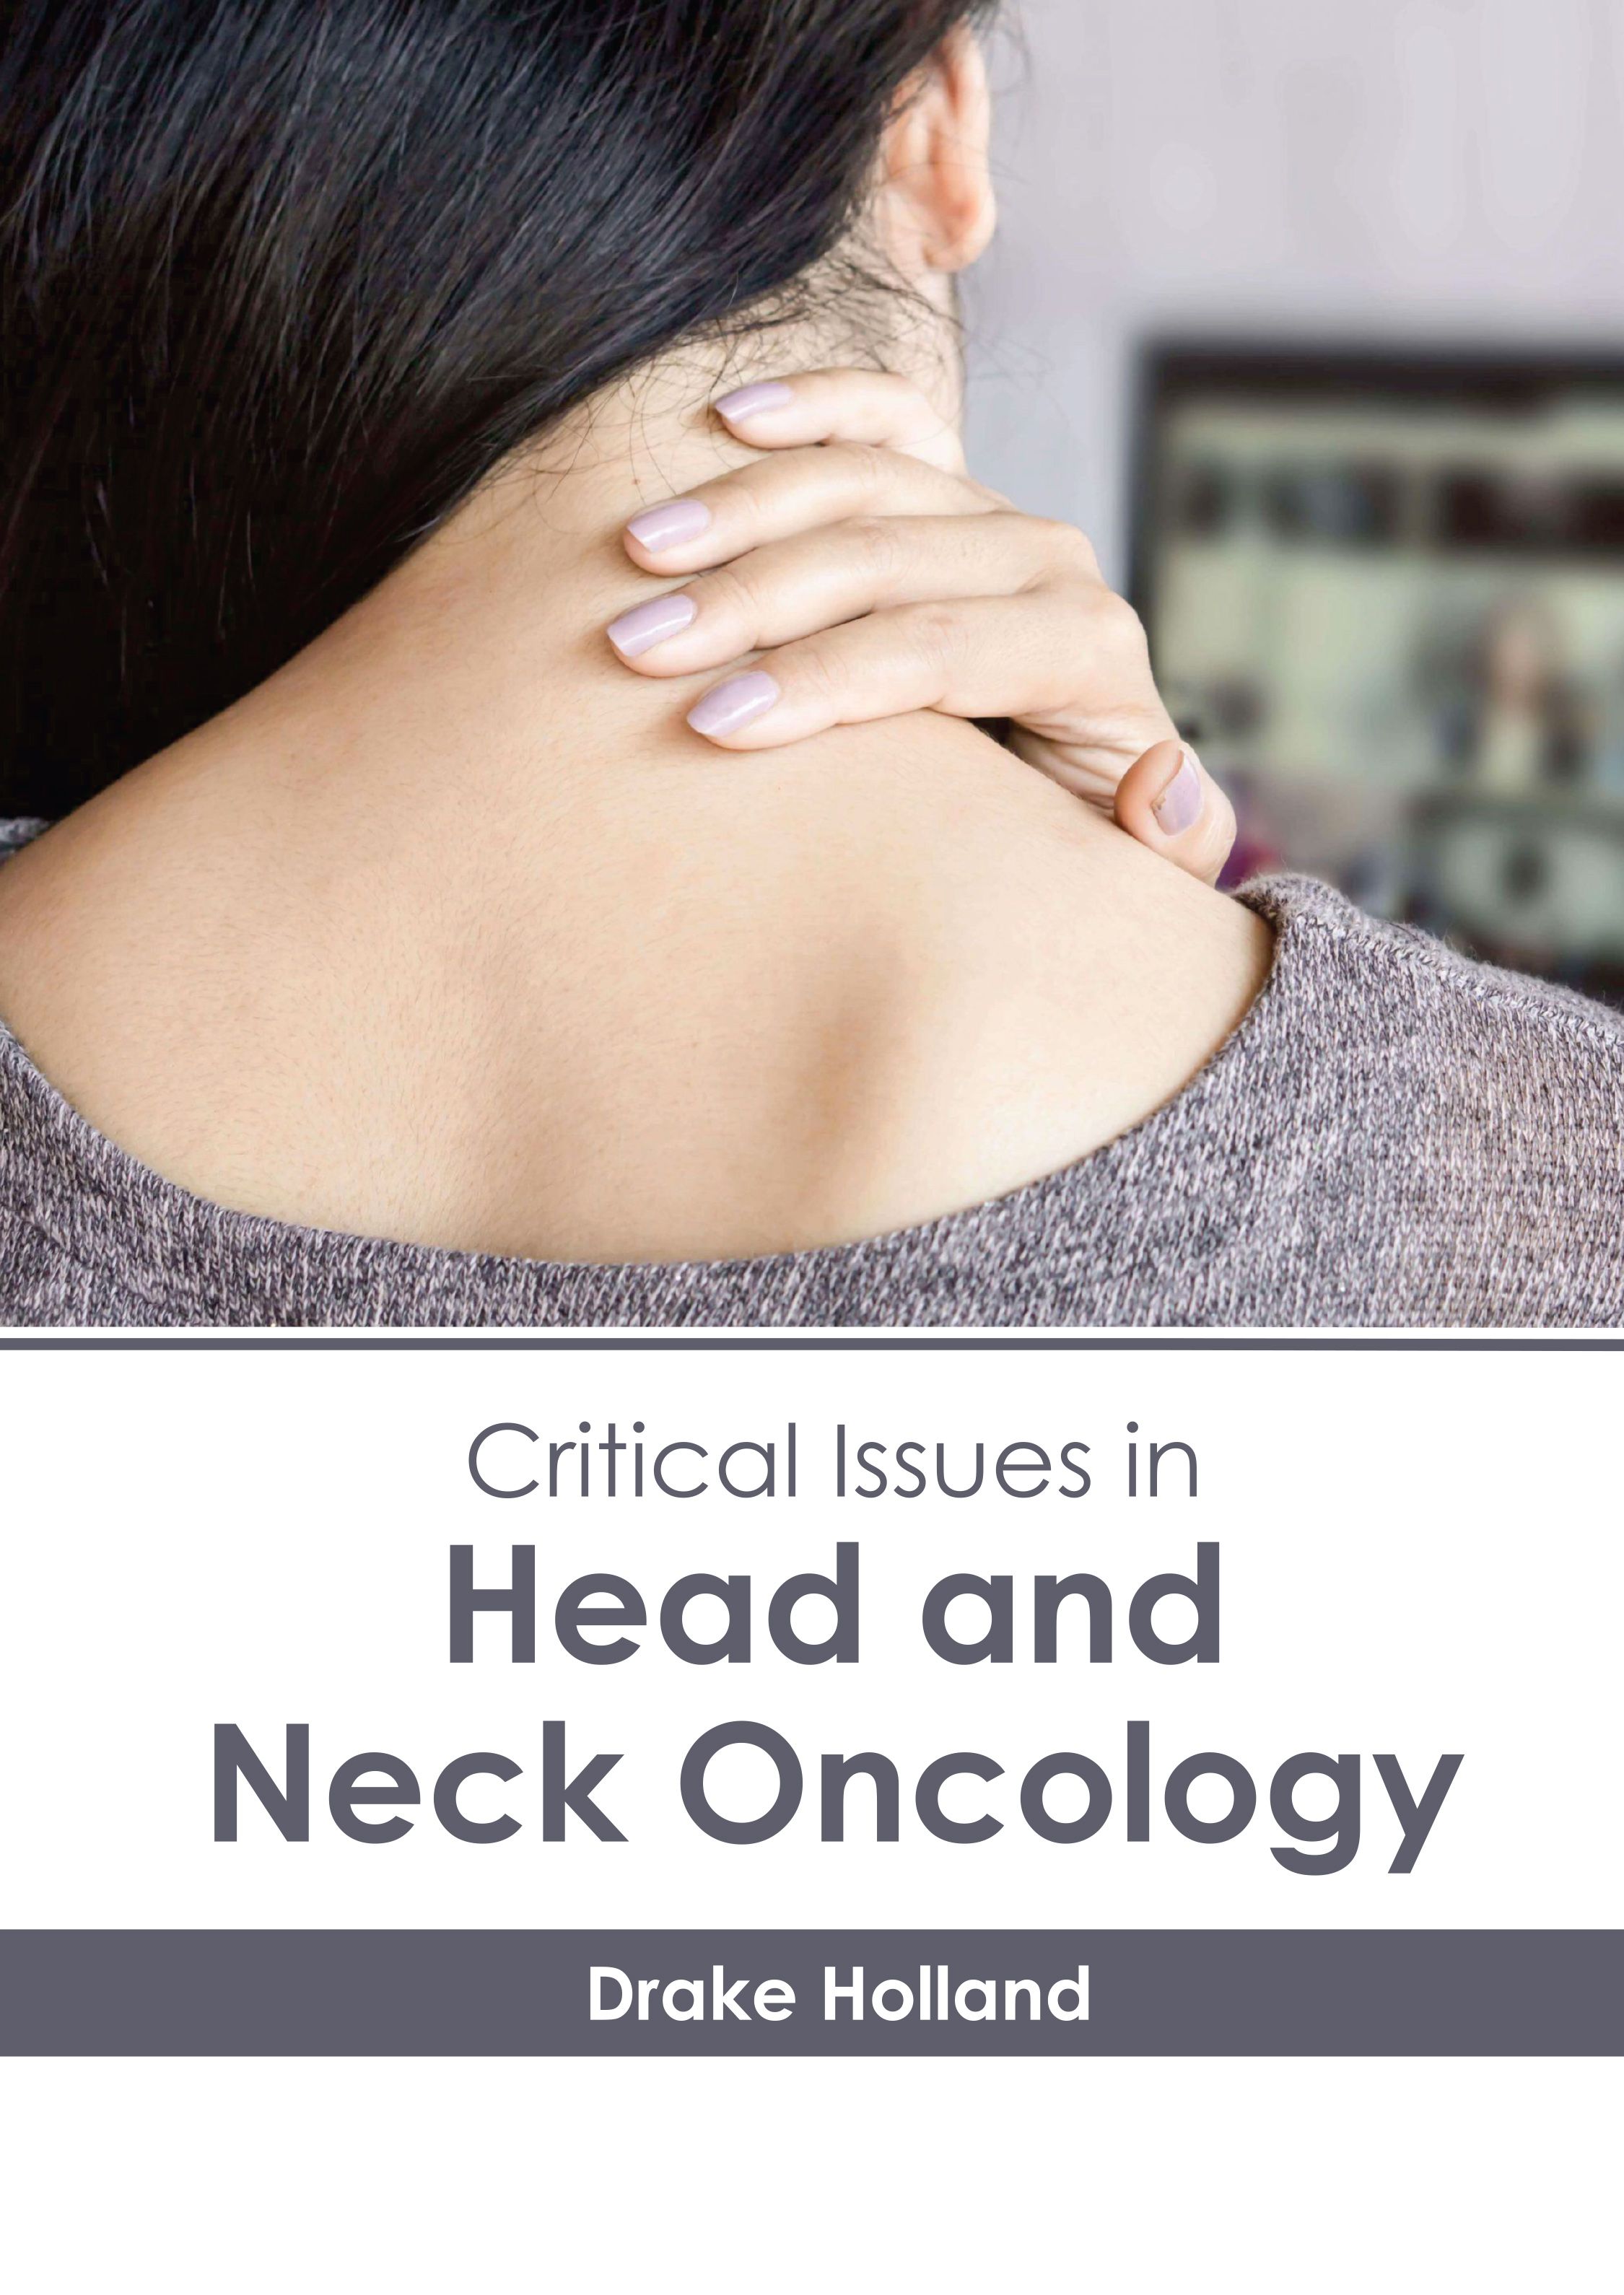 CRITICAL ISSUES IN HEAD AND NECK ONCOLOGY